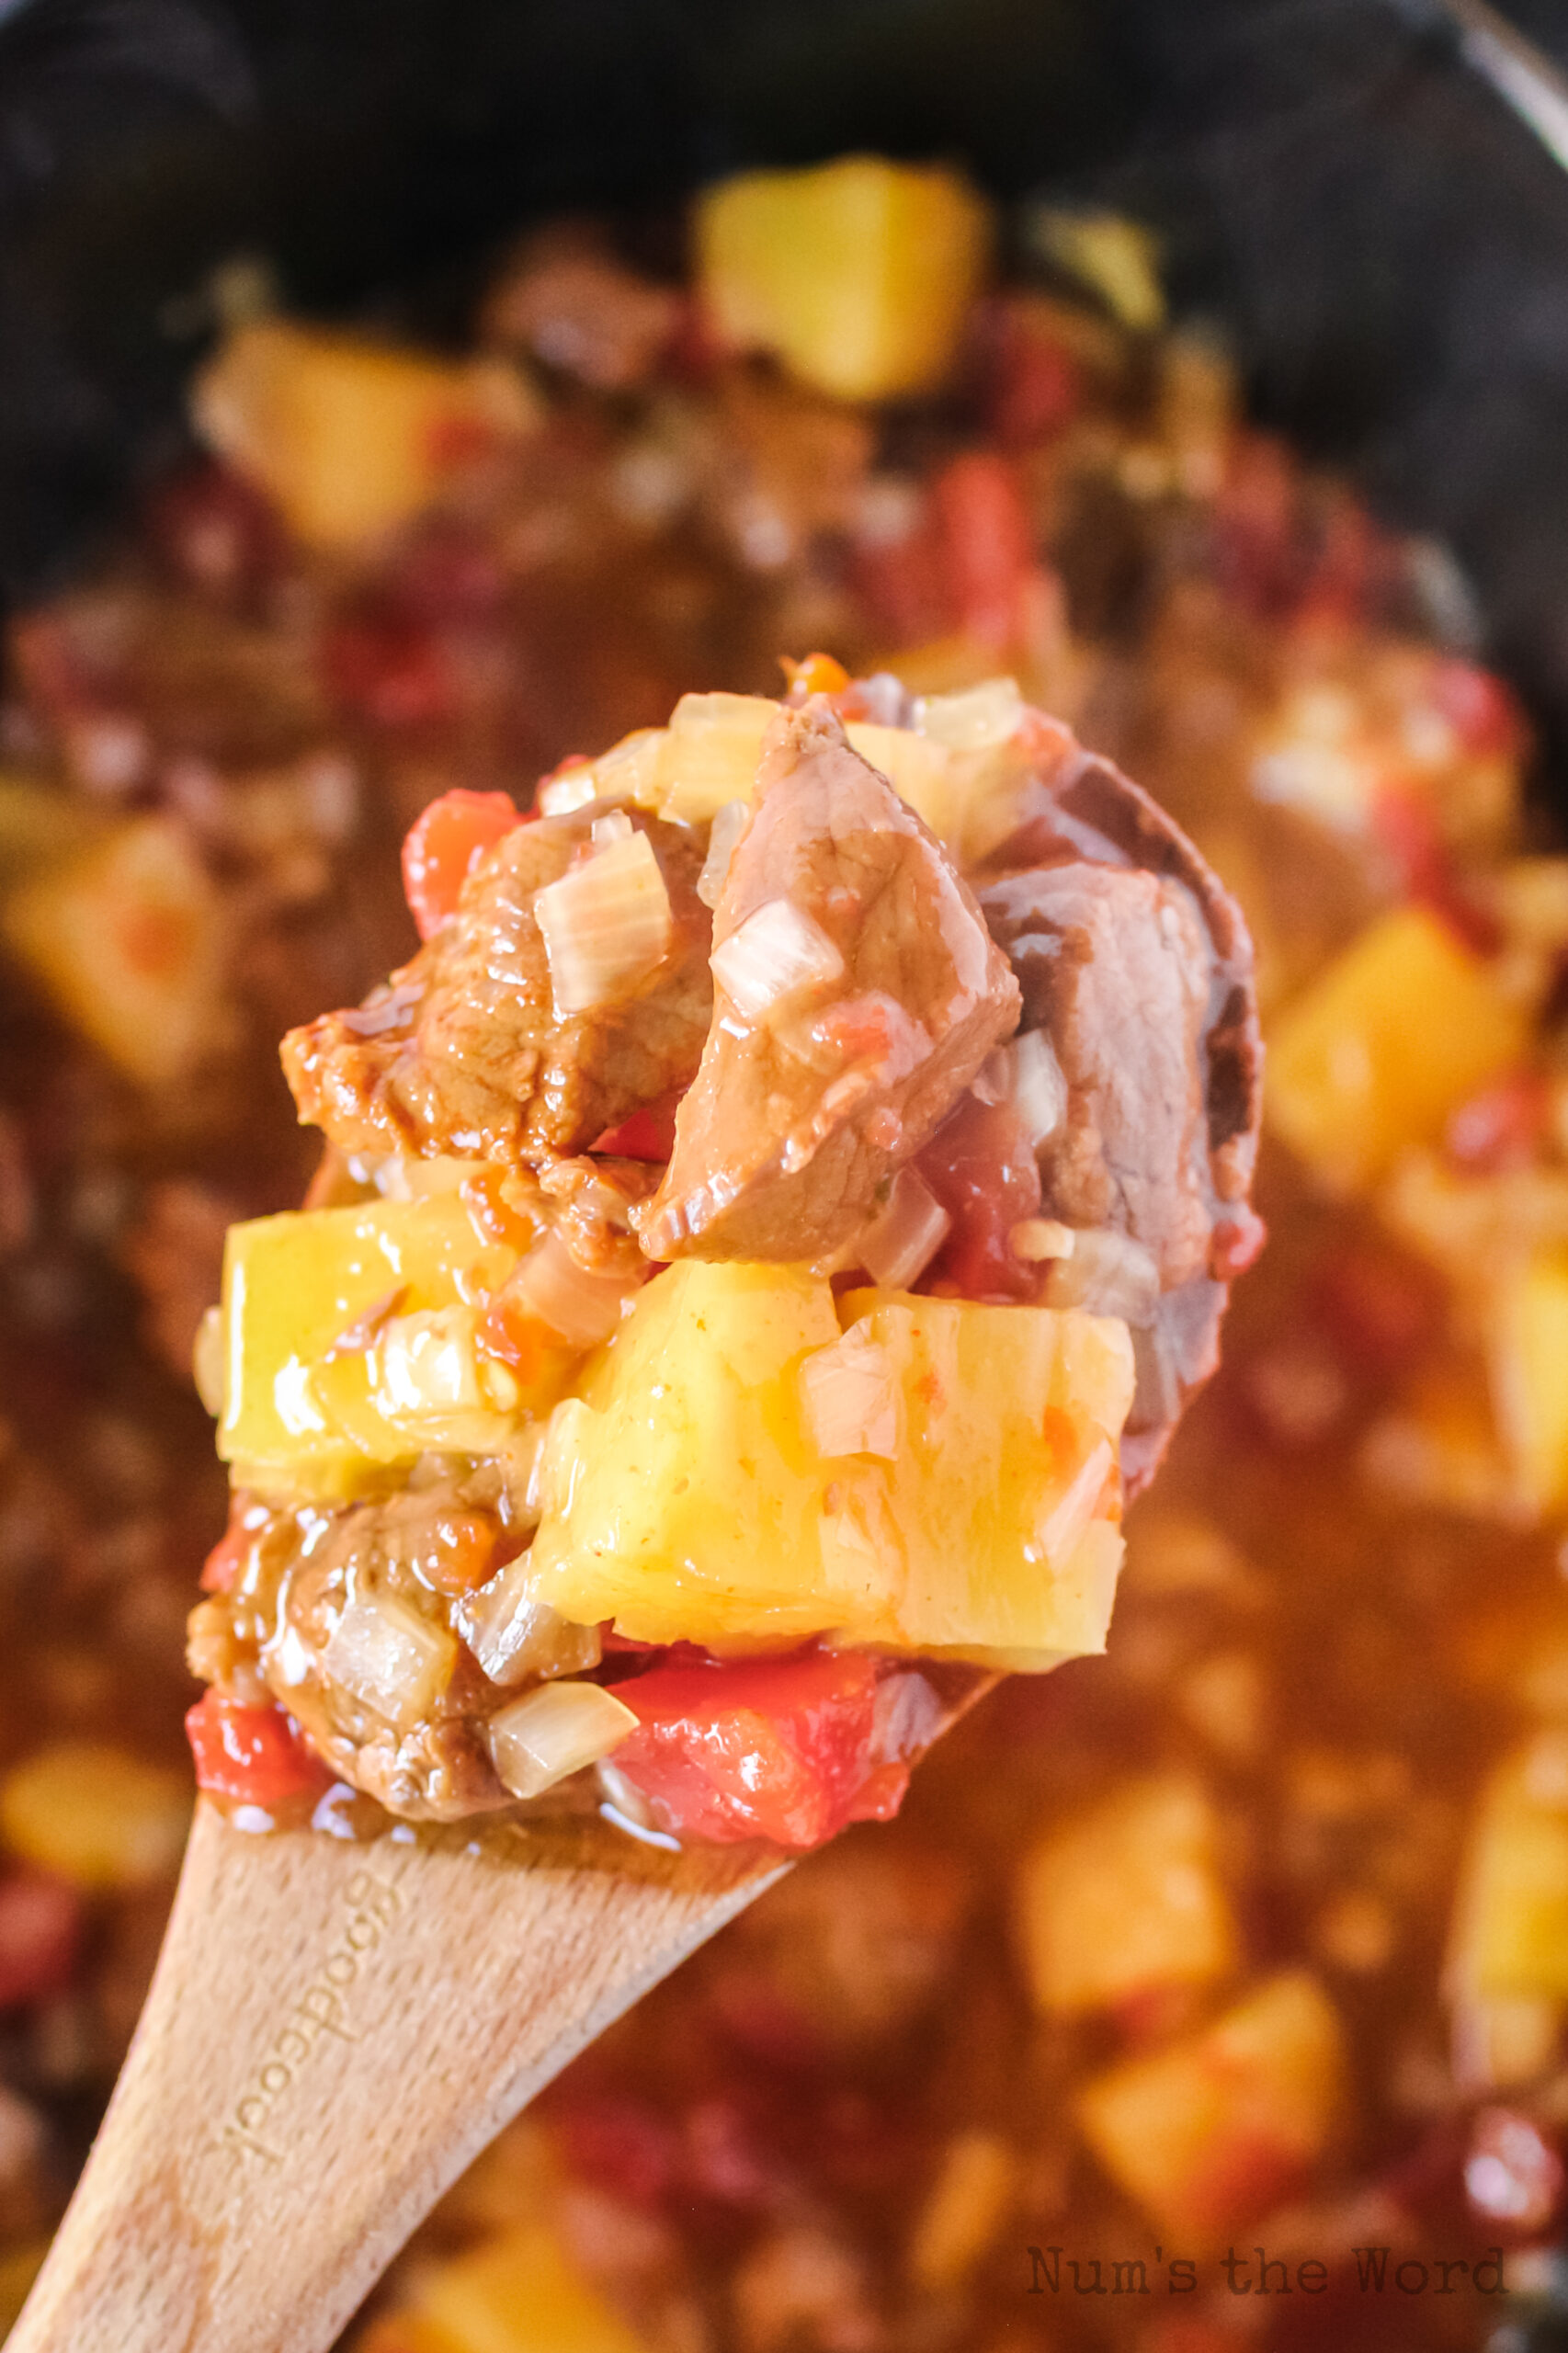 wooden spoon held close to camera lens showing off yummy beef and pineapple